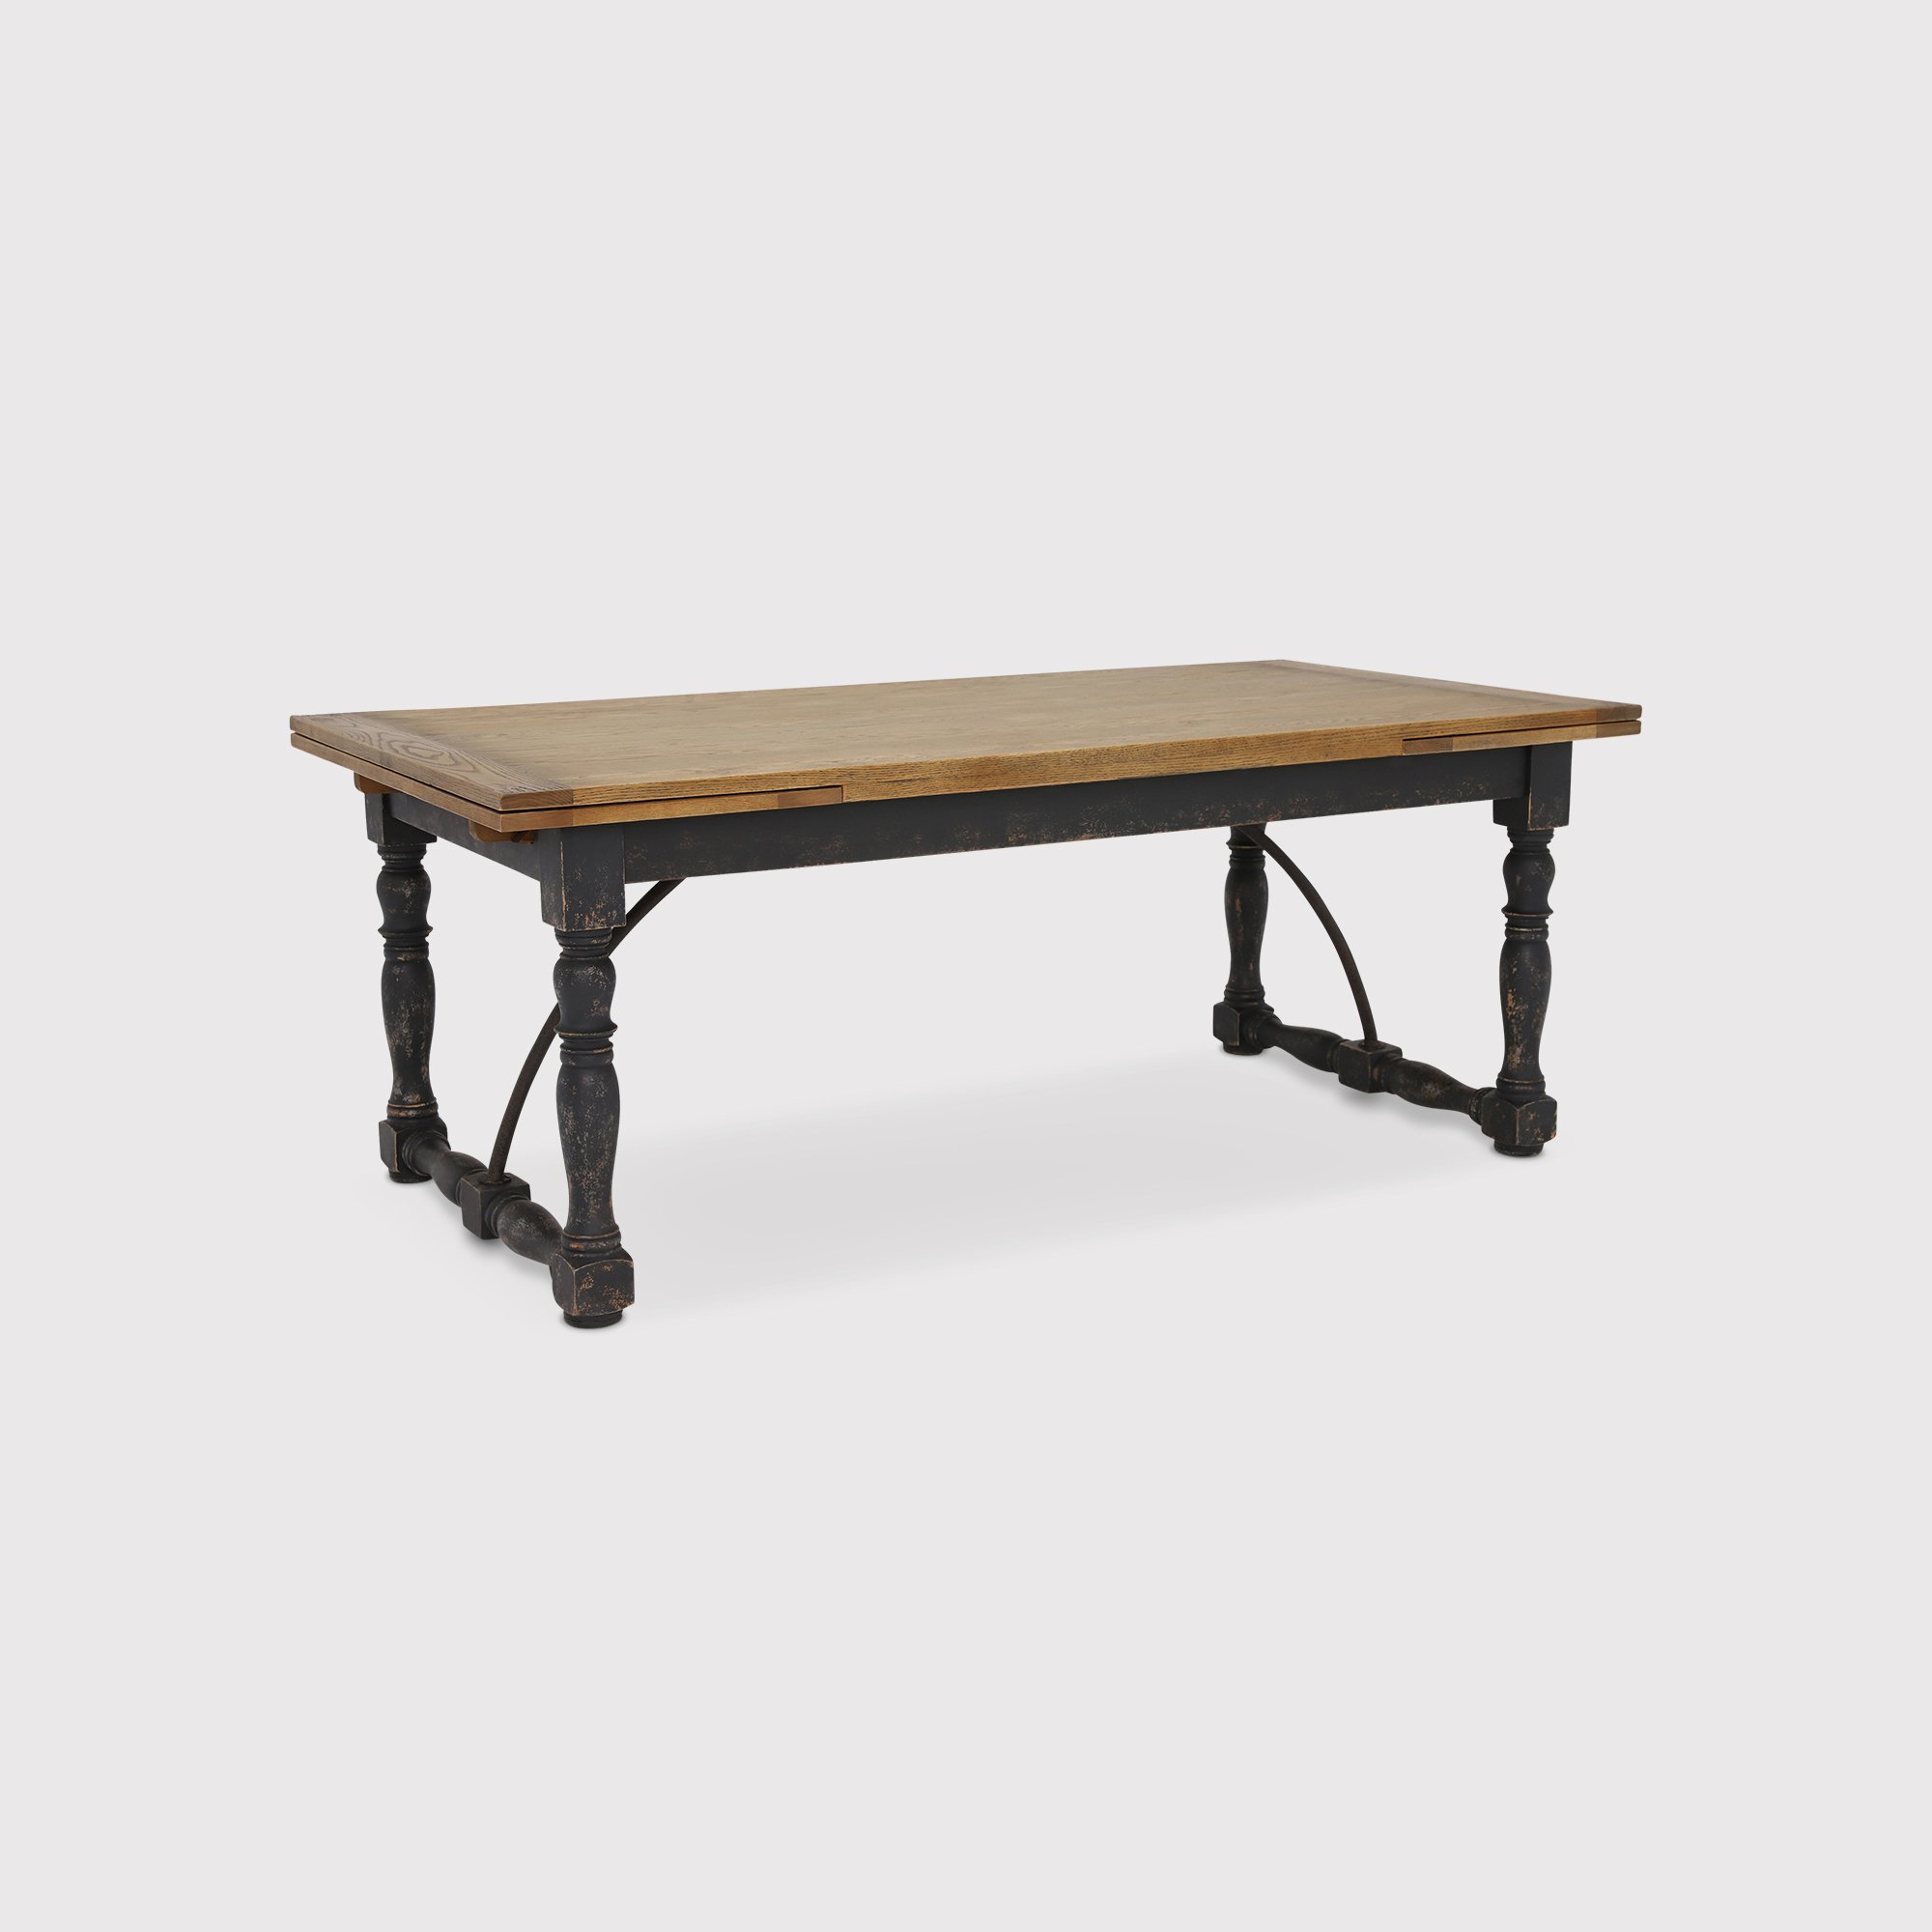 Keeler Dining Table with Two Leaves 200/300x100cm, Brown Oak | Barker & Stonehouse